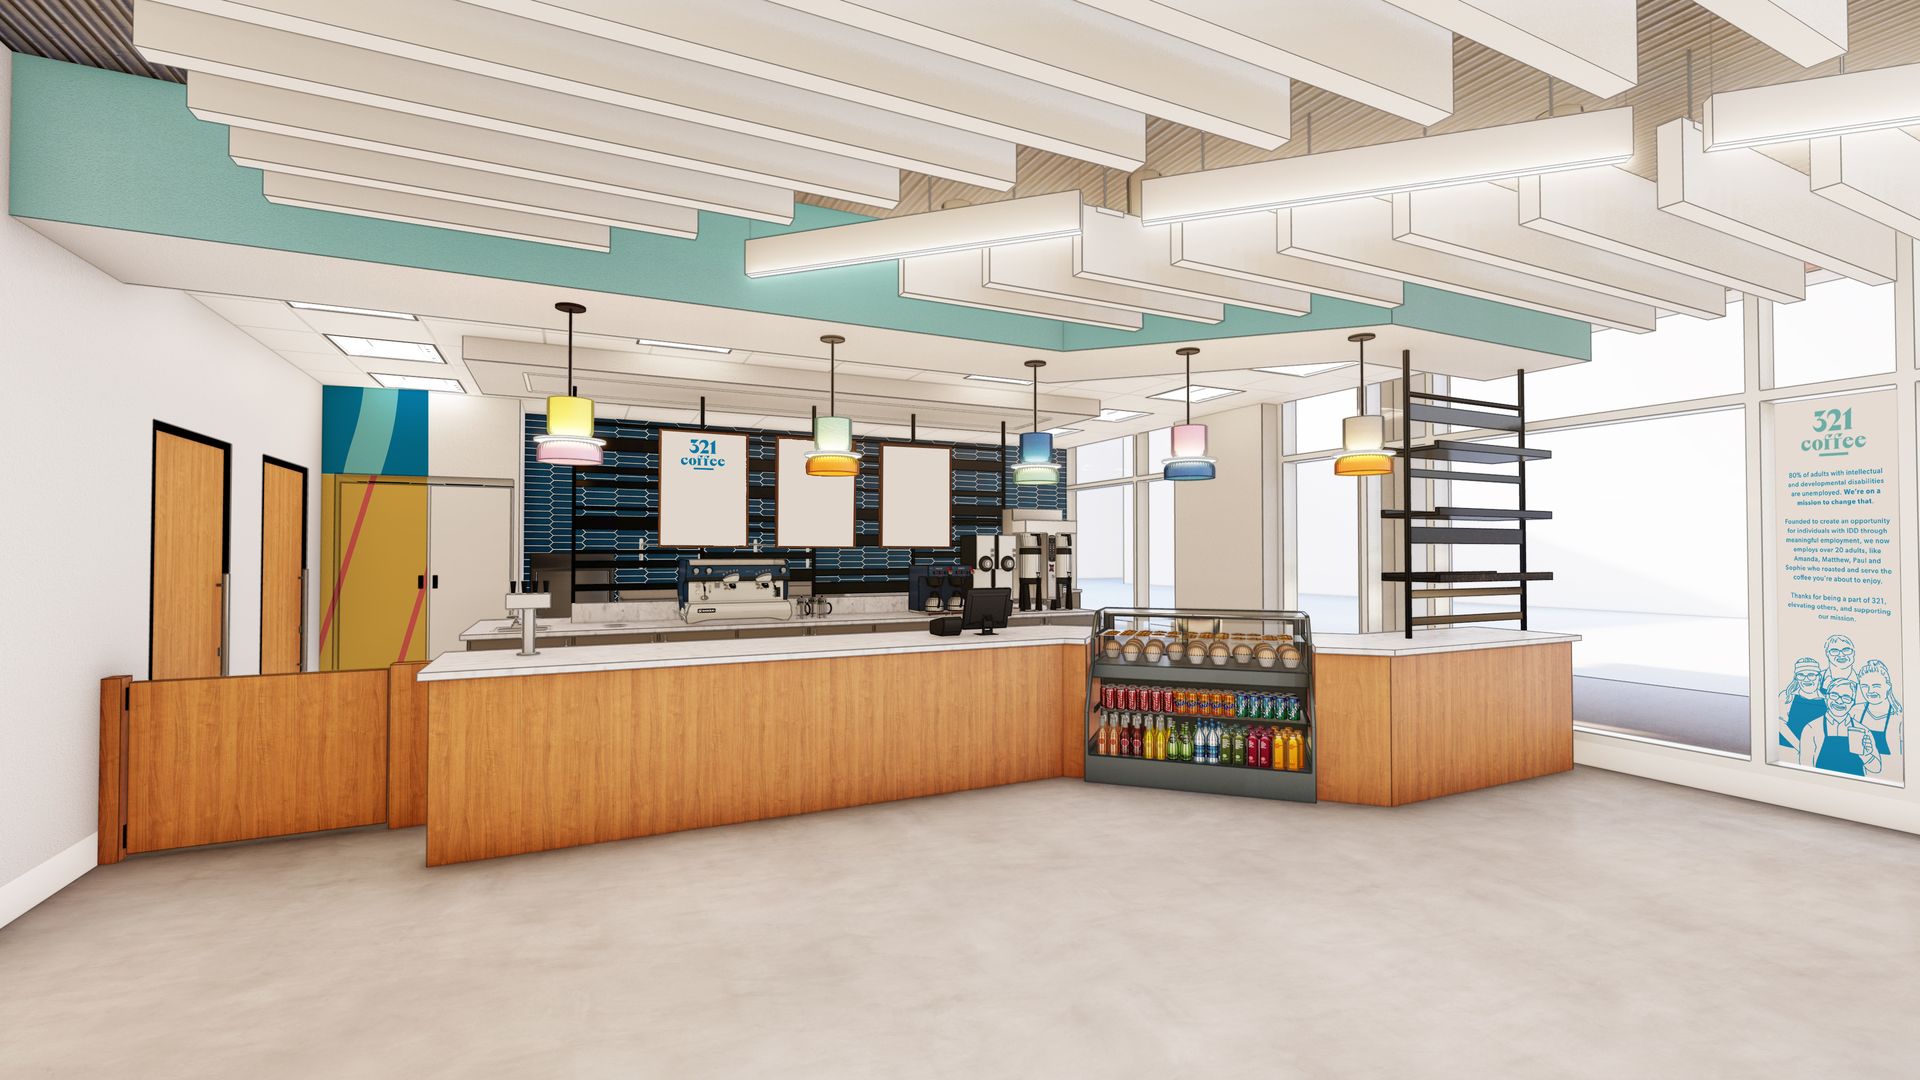 A graphic rendering of 321 Coffee's shop in Durham's 300 Morris building. 